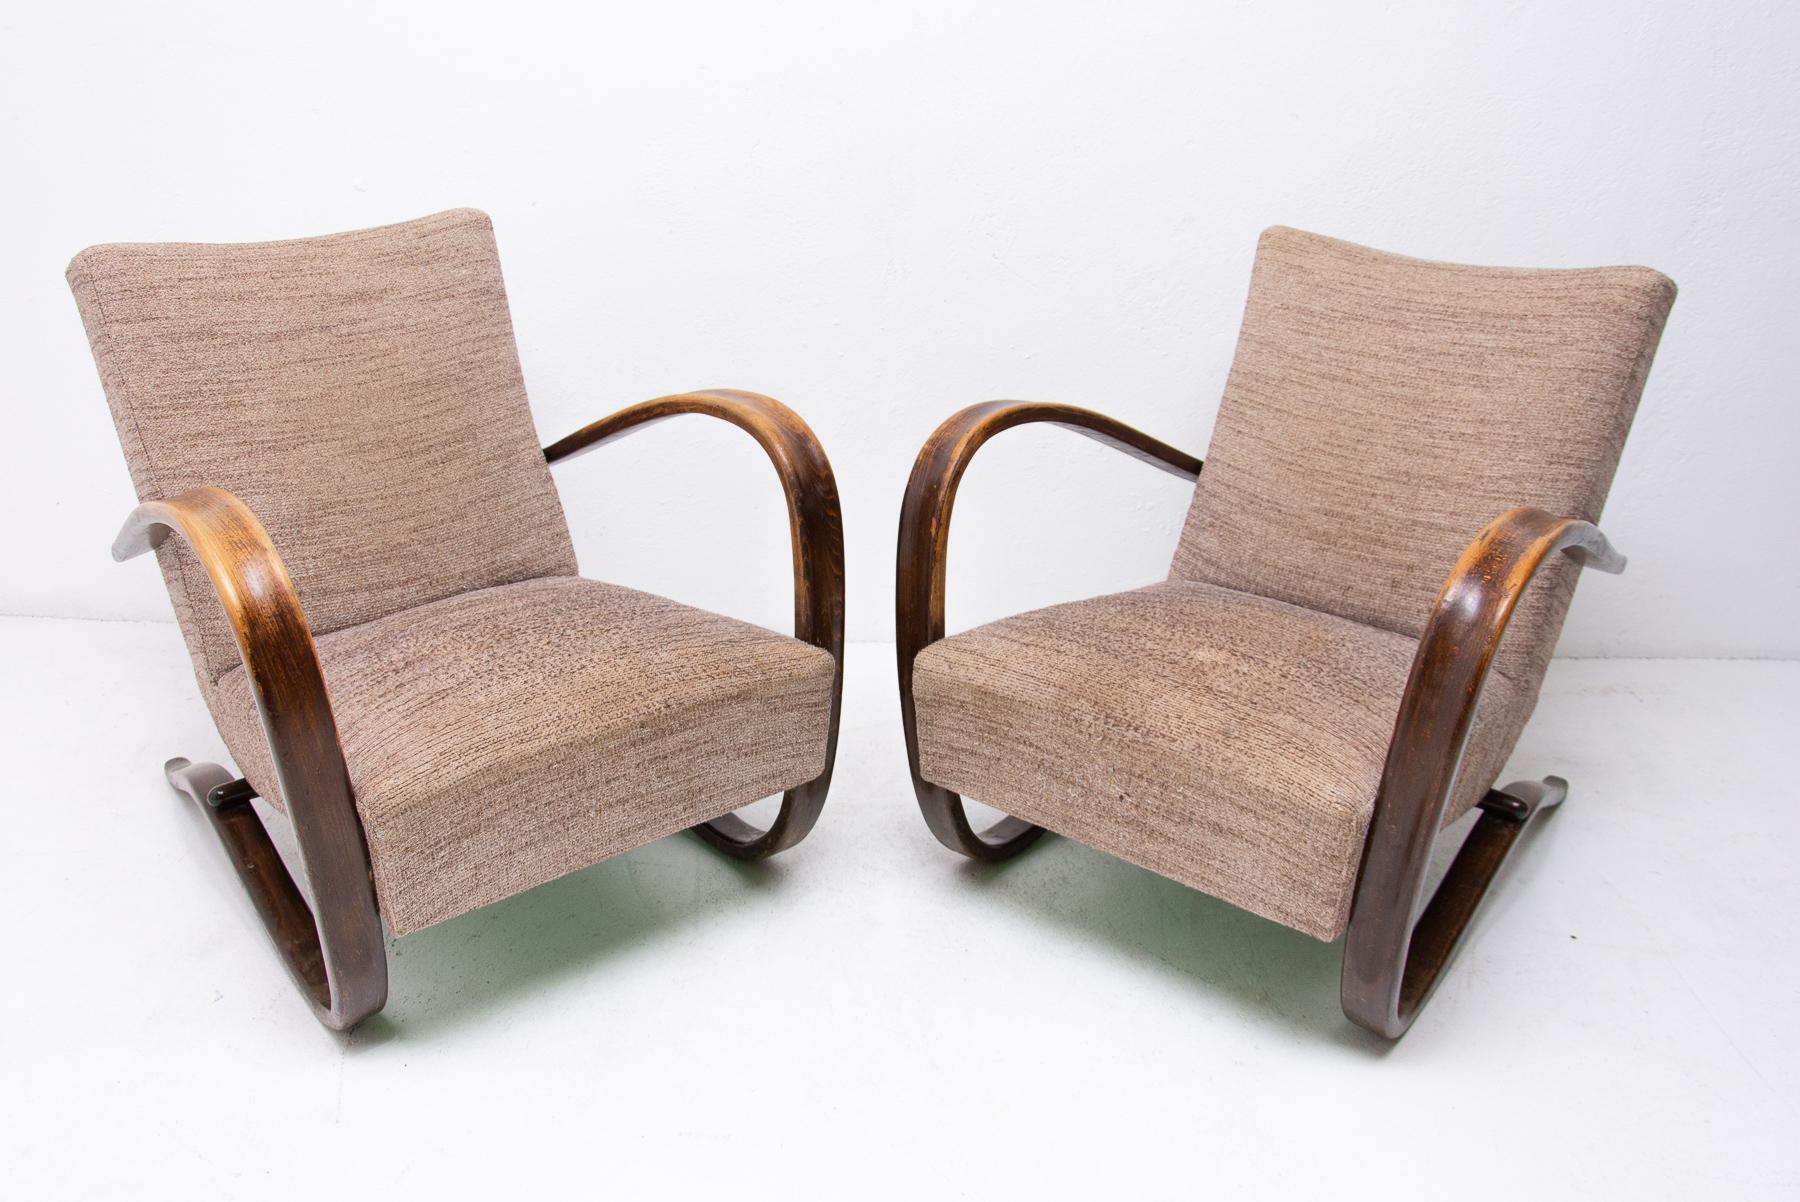 A pair of famous Art Deco ebonized bentwood armchairs by Jindrich Halabala, model H-269 from the 1930s. These armchairs were made in the 1940´s. The wooden armrests are in very good Vintage condition without cracks etc. Upholstery including fabric